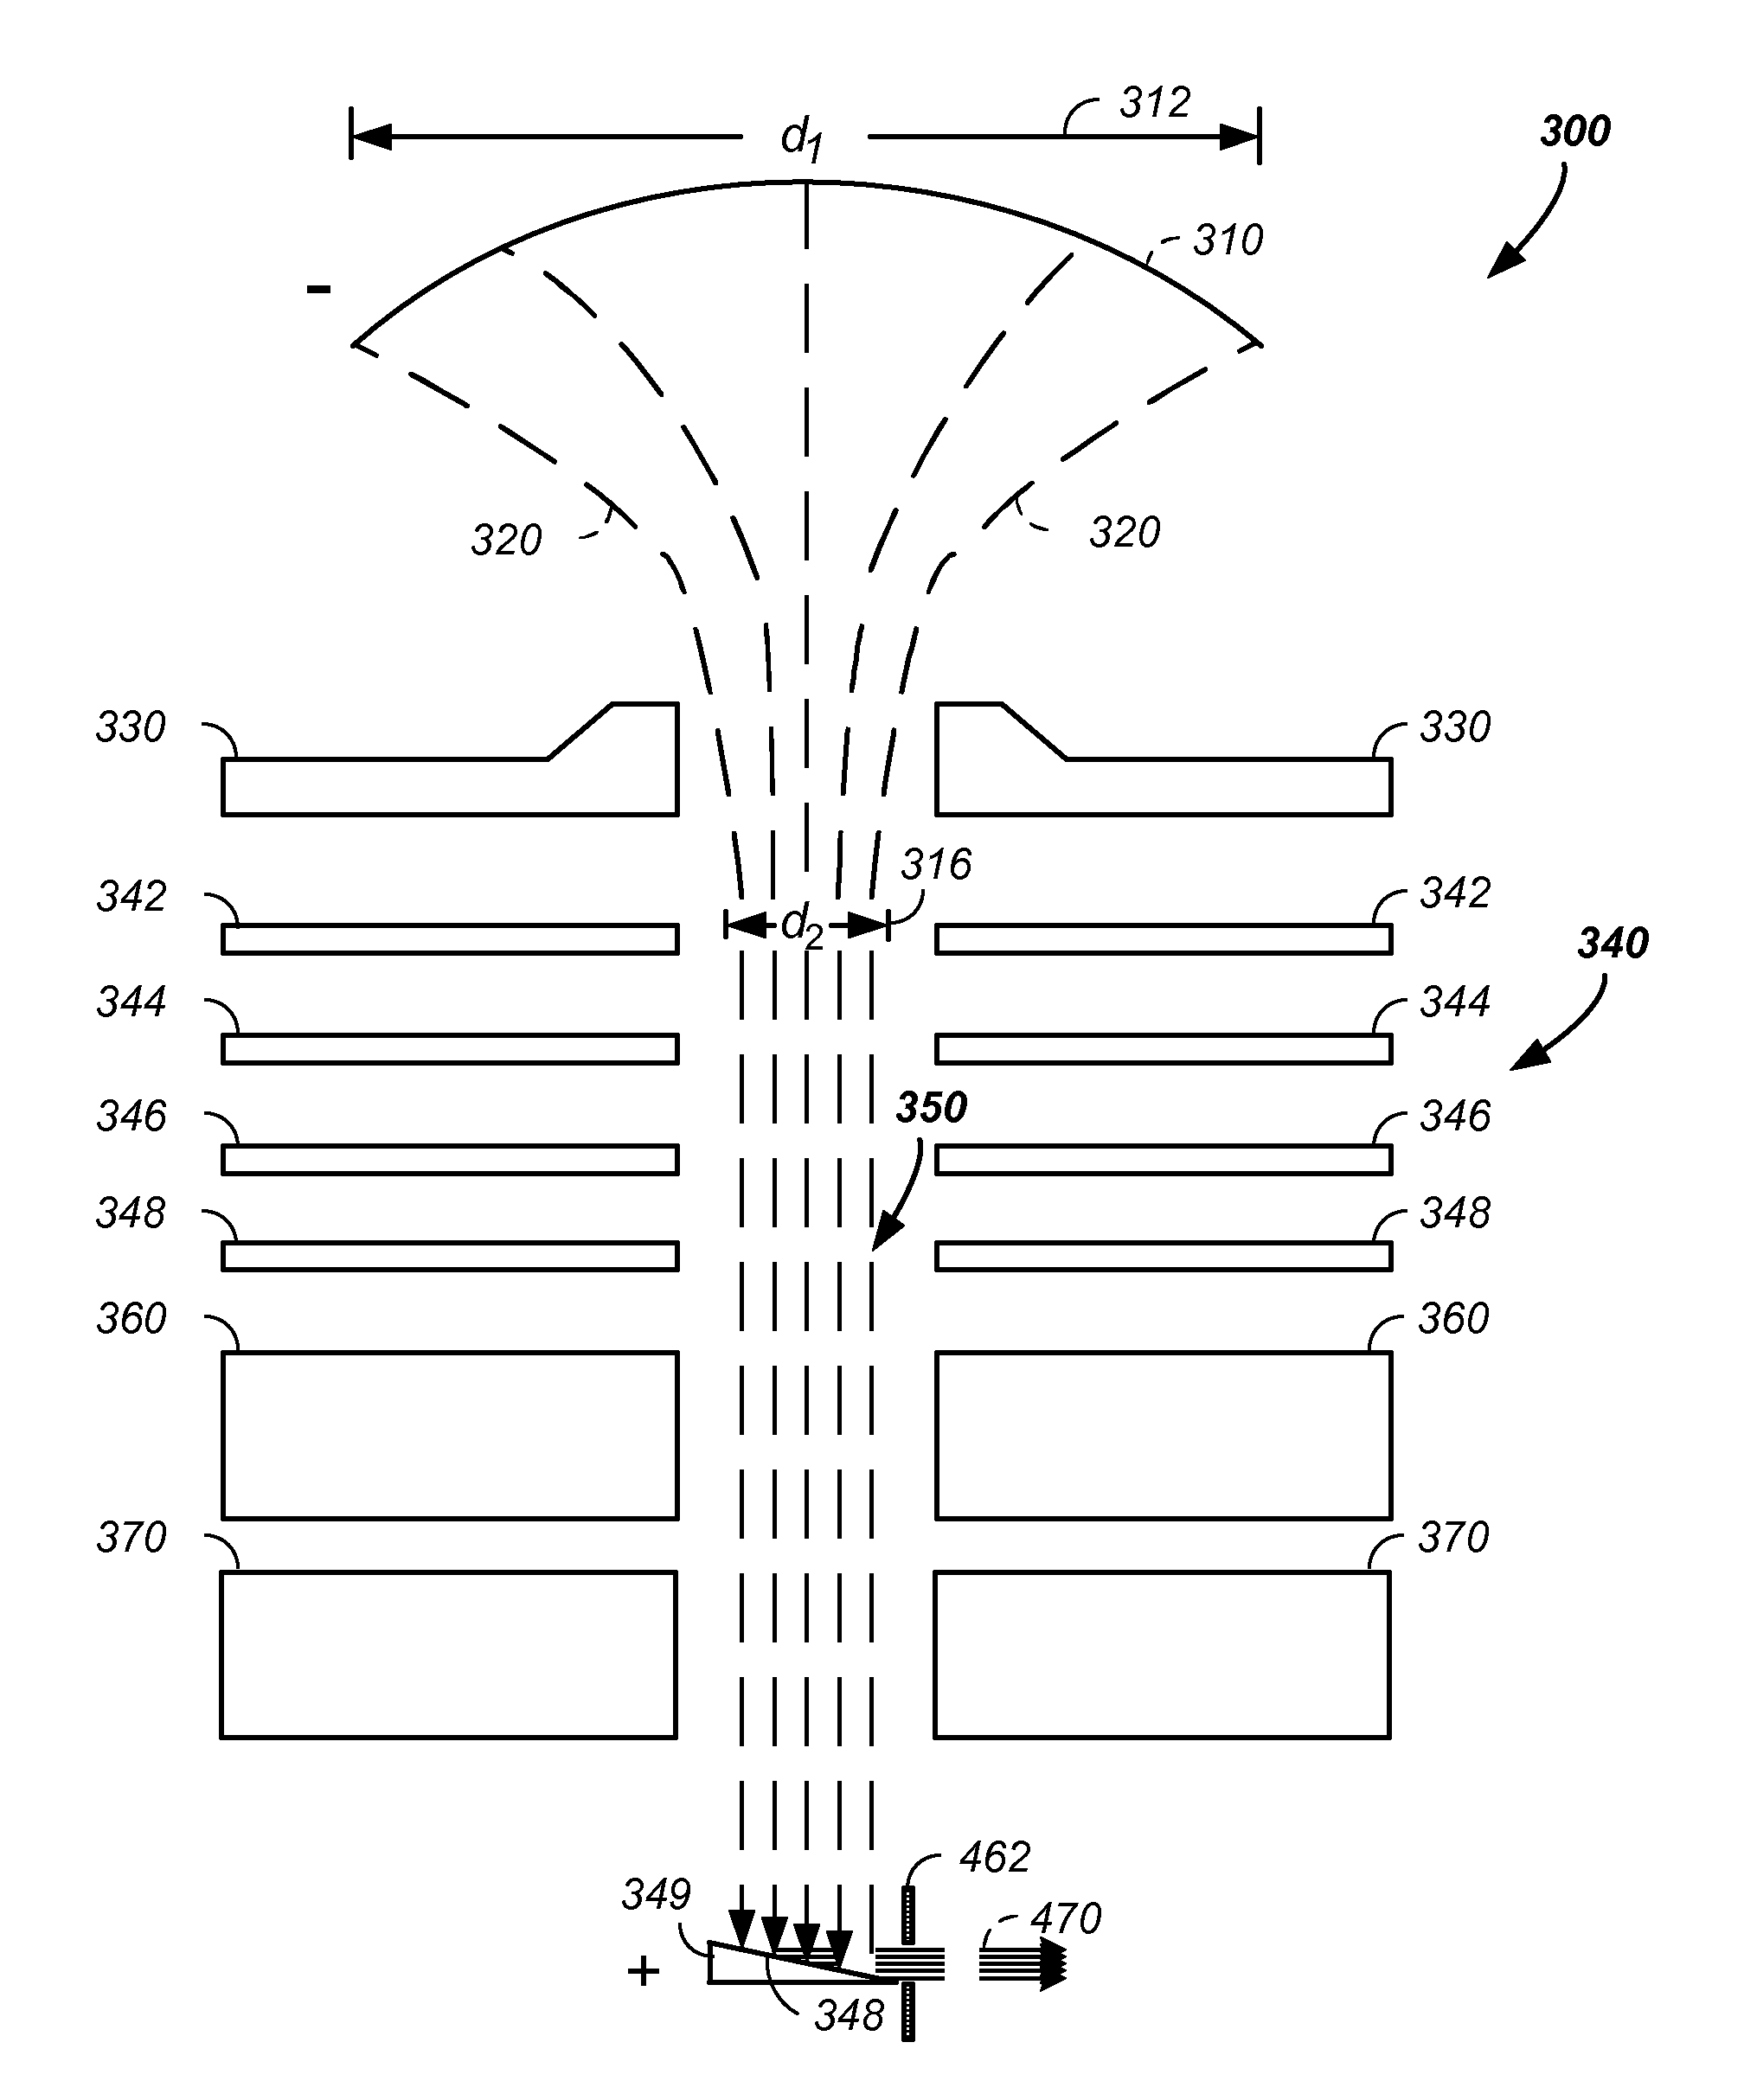 Elongated lifetime x-ray method and apparatus used in conjunction with a charged particle cancer therapy system